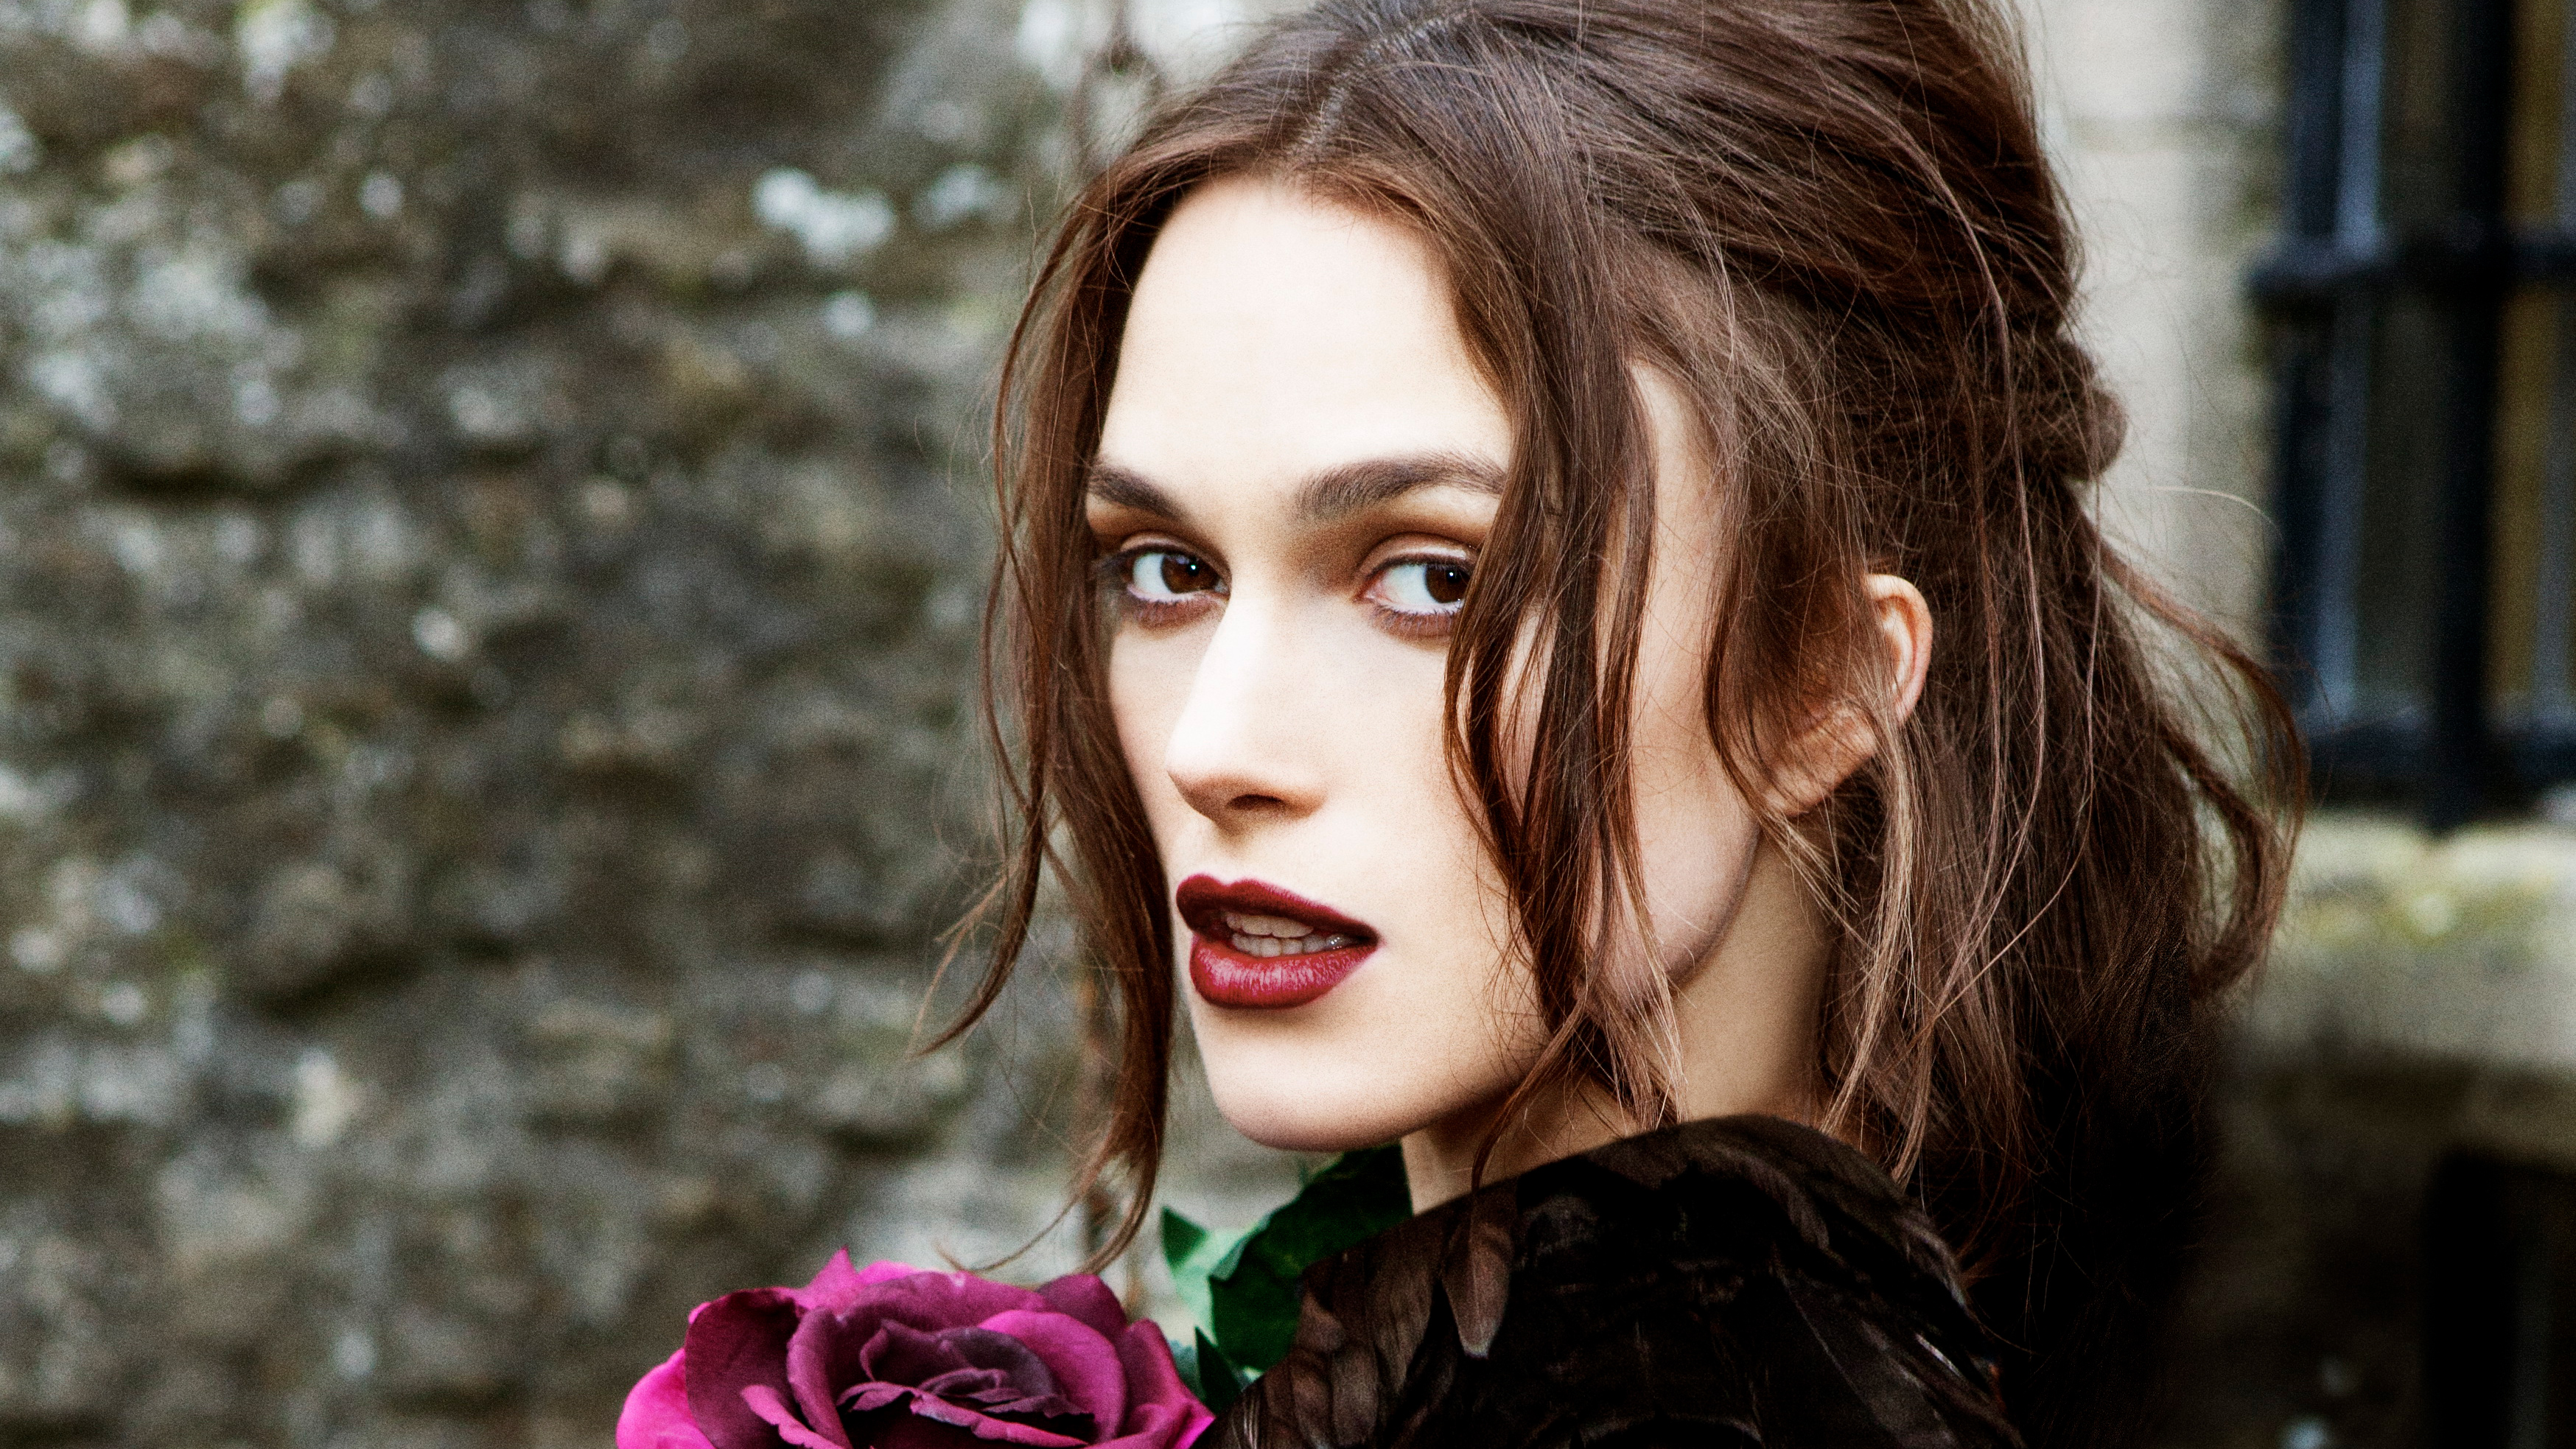 140 Keira Knightley HD Wallpapers and Backgrounds